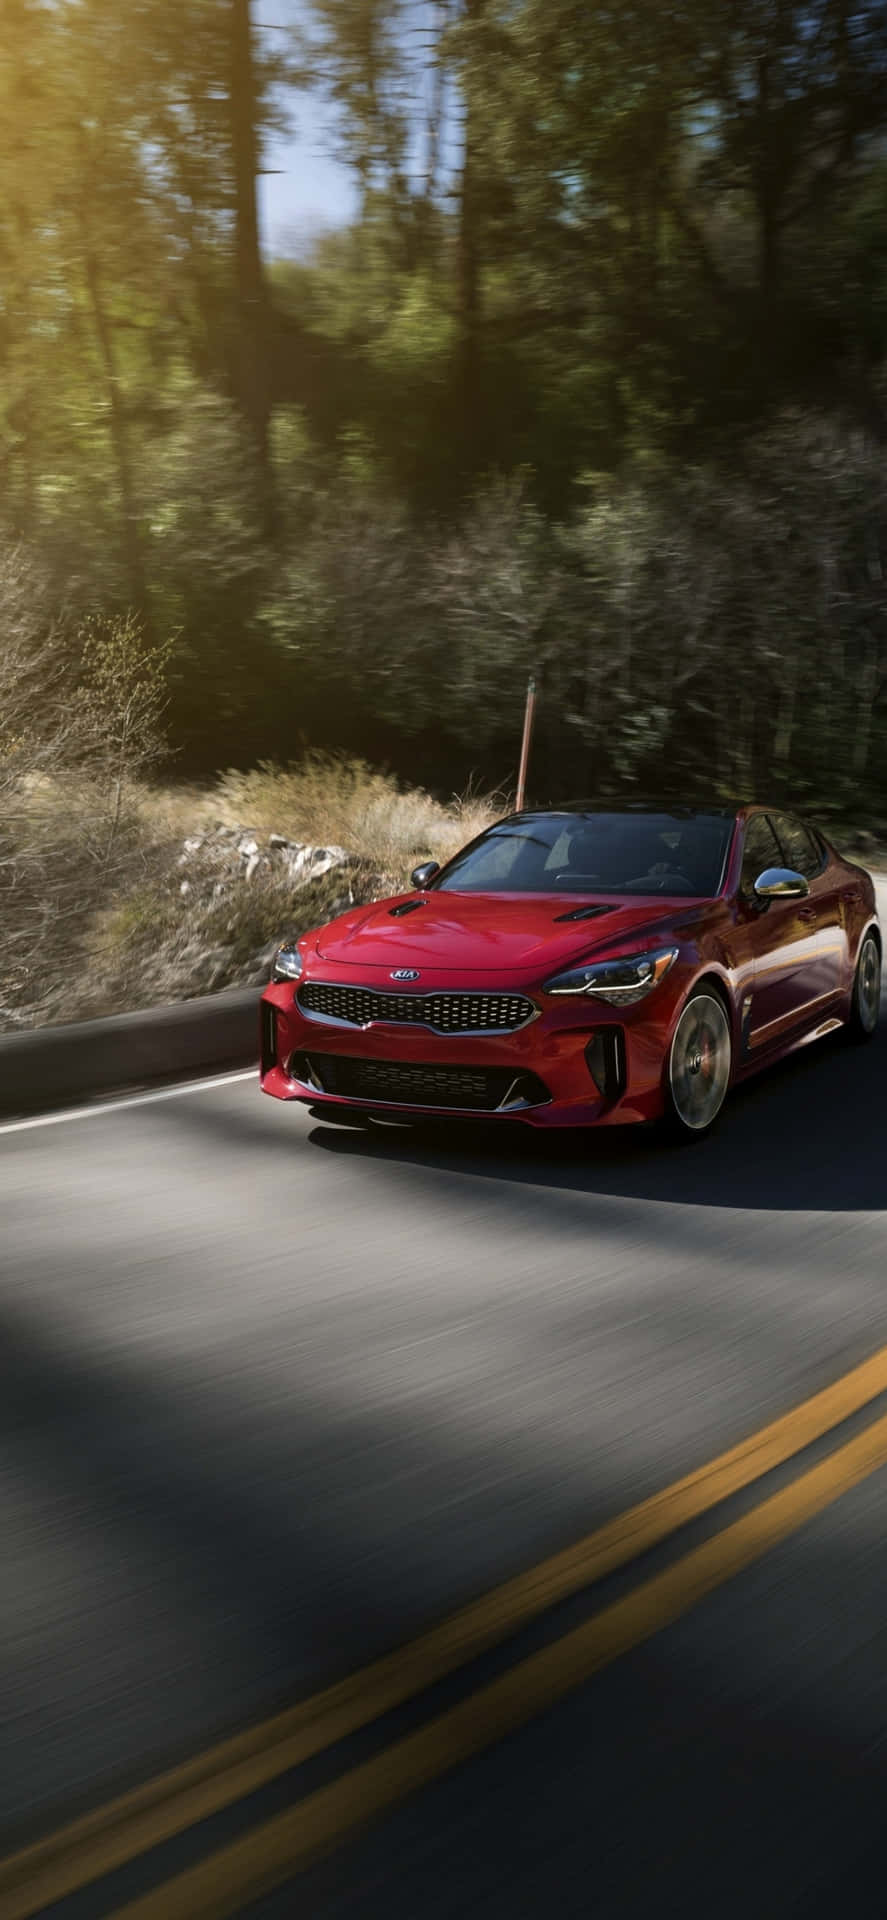 The Red Kia Stinger Driving Down A Road